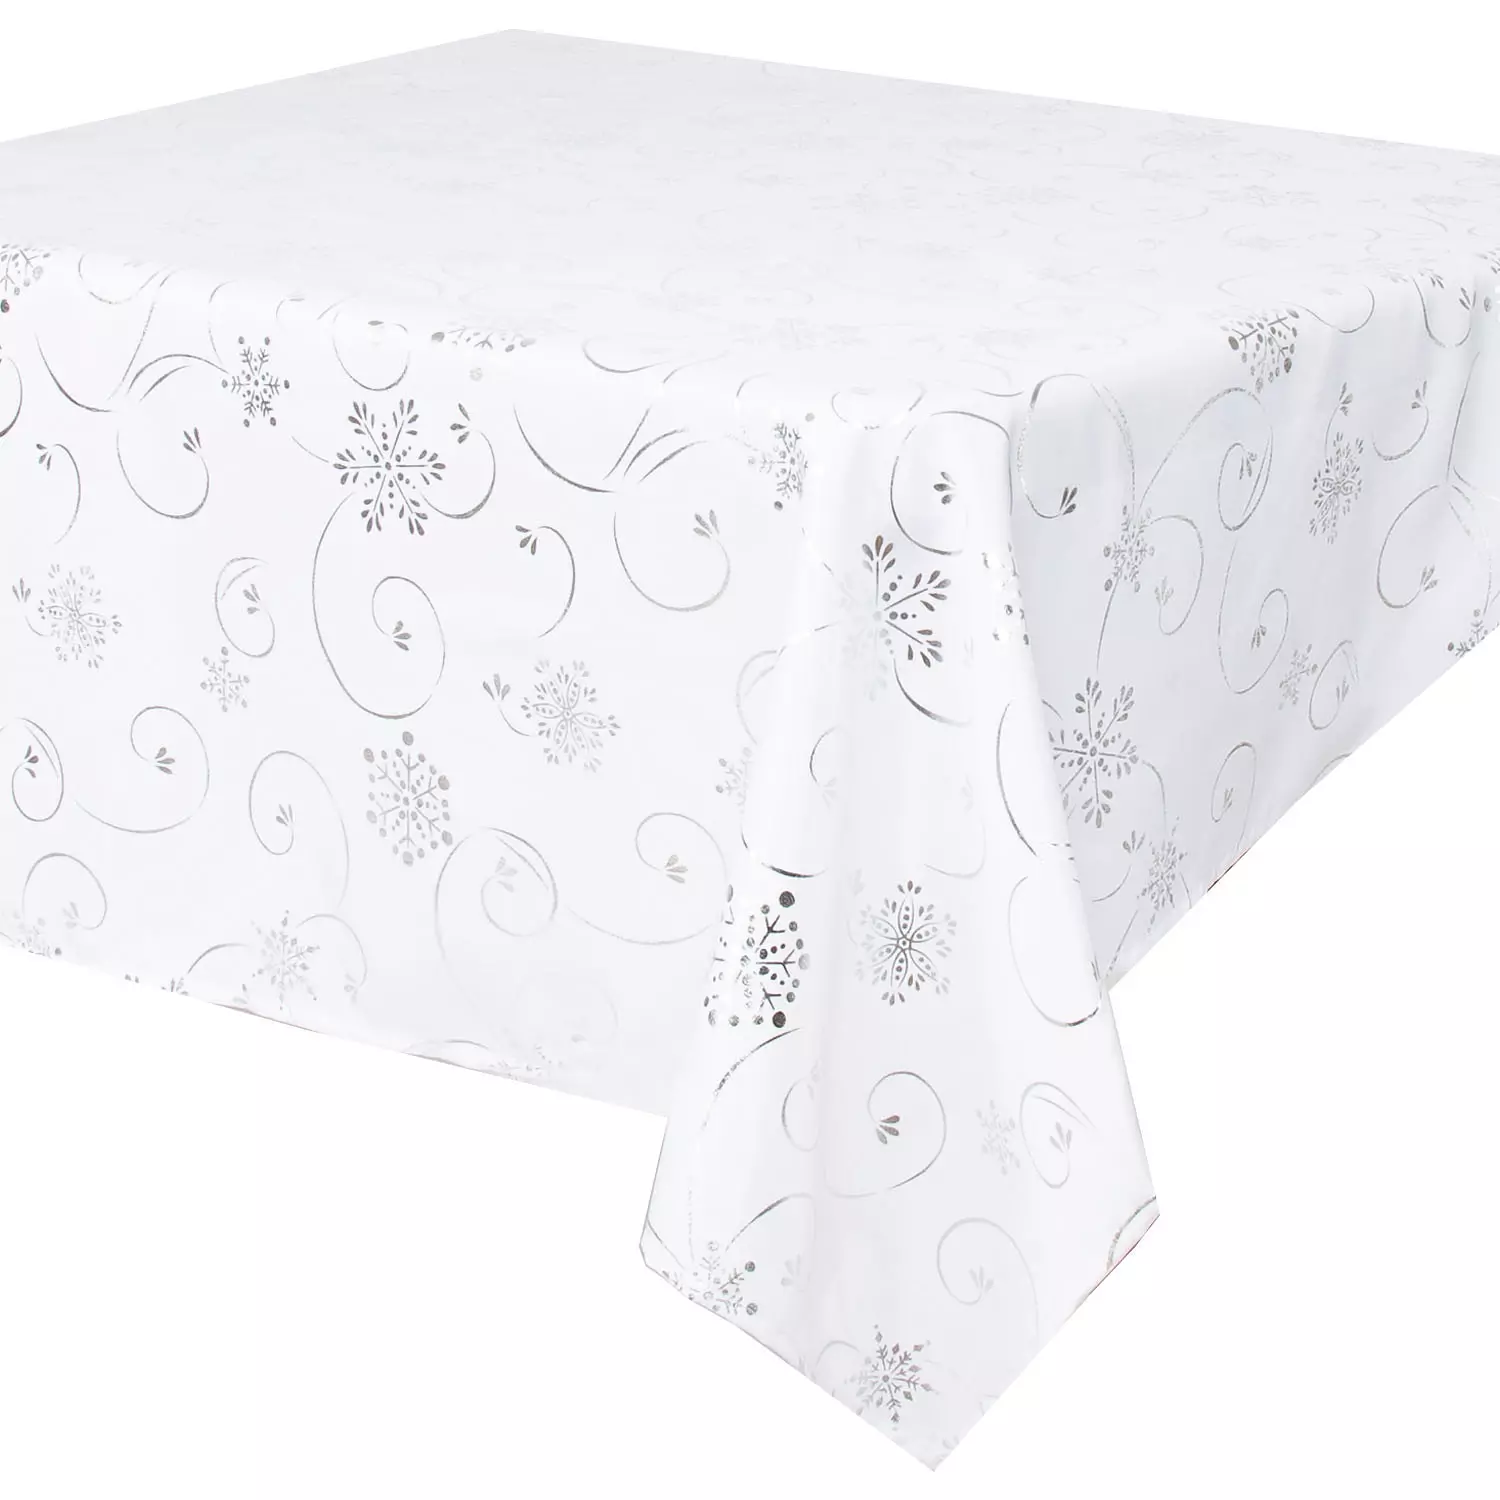 Elegance Collection, Christmas holiday fabric tablecloth, foil printed snowflakes and swirls, 60"x102", white